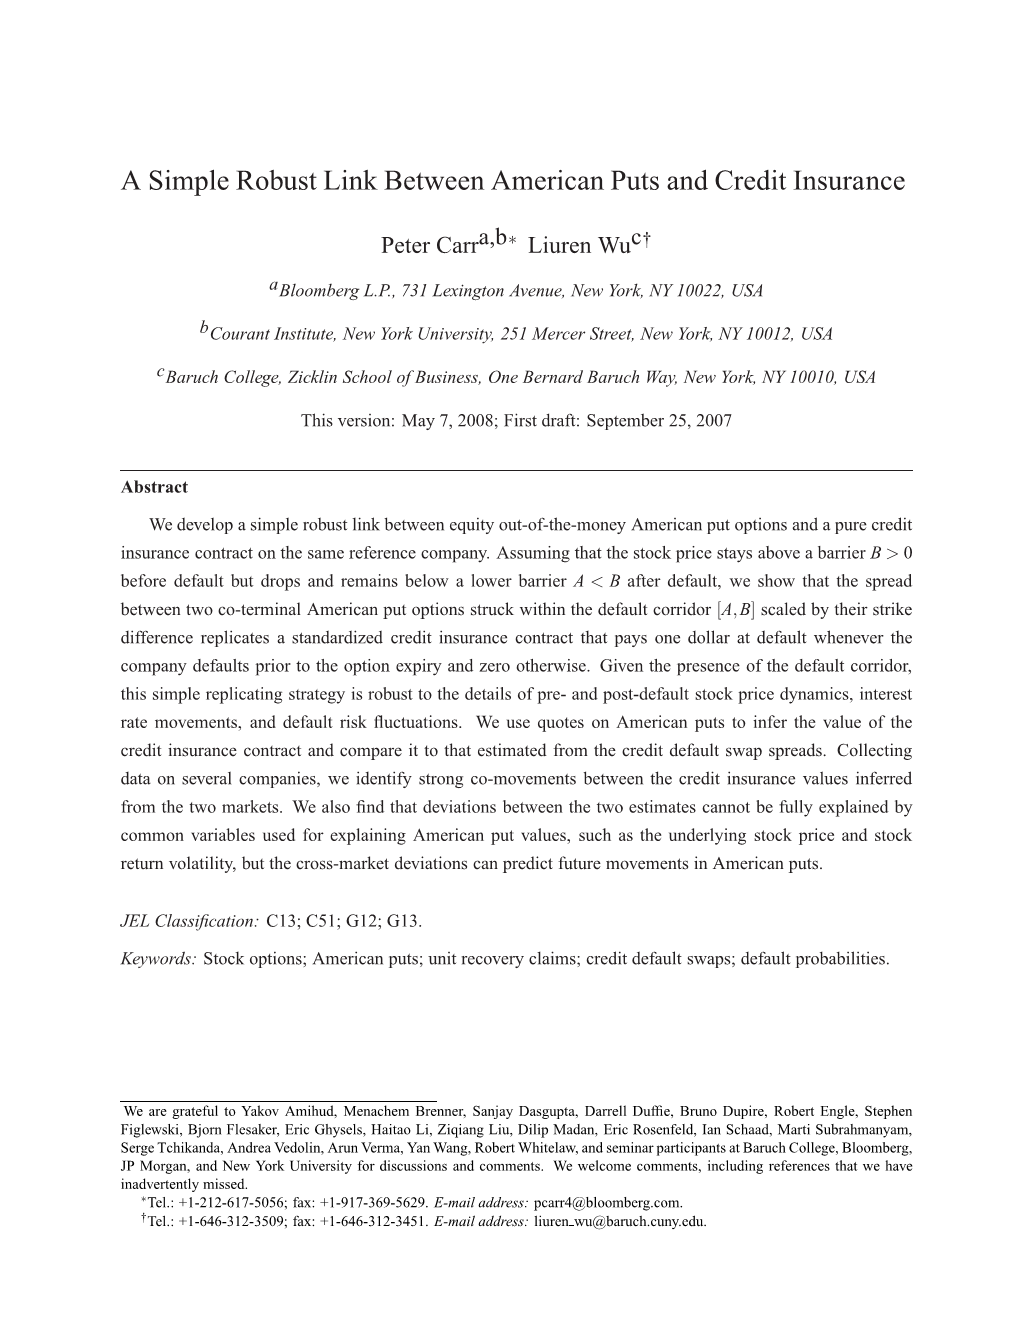 A Simple Robust Link Between American Puts and Credit Insurance